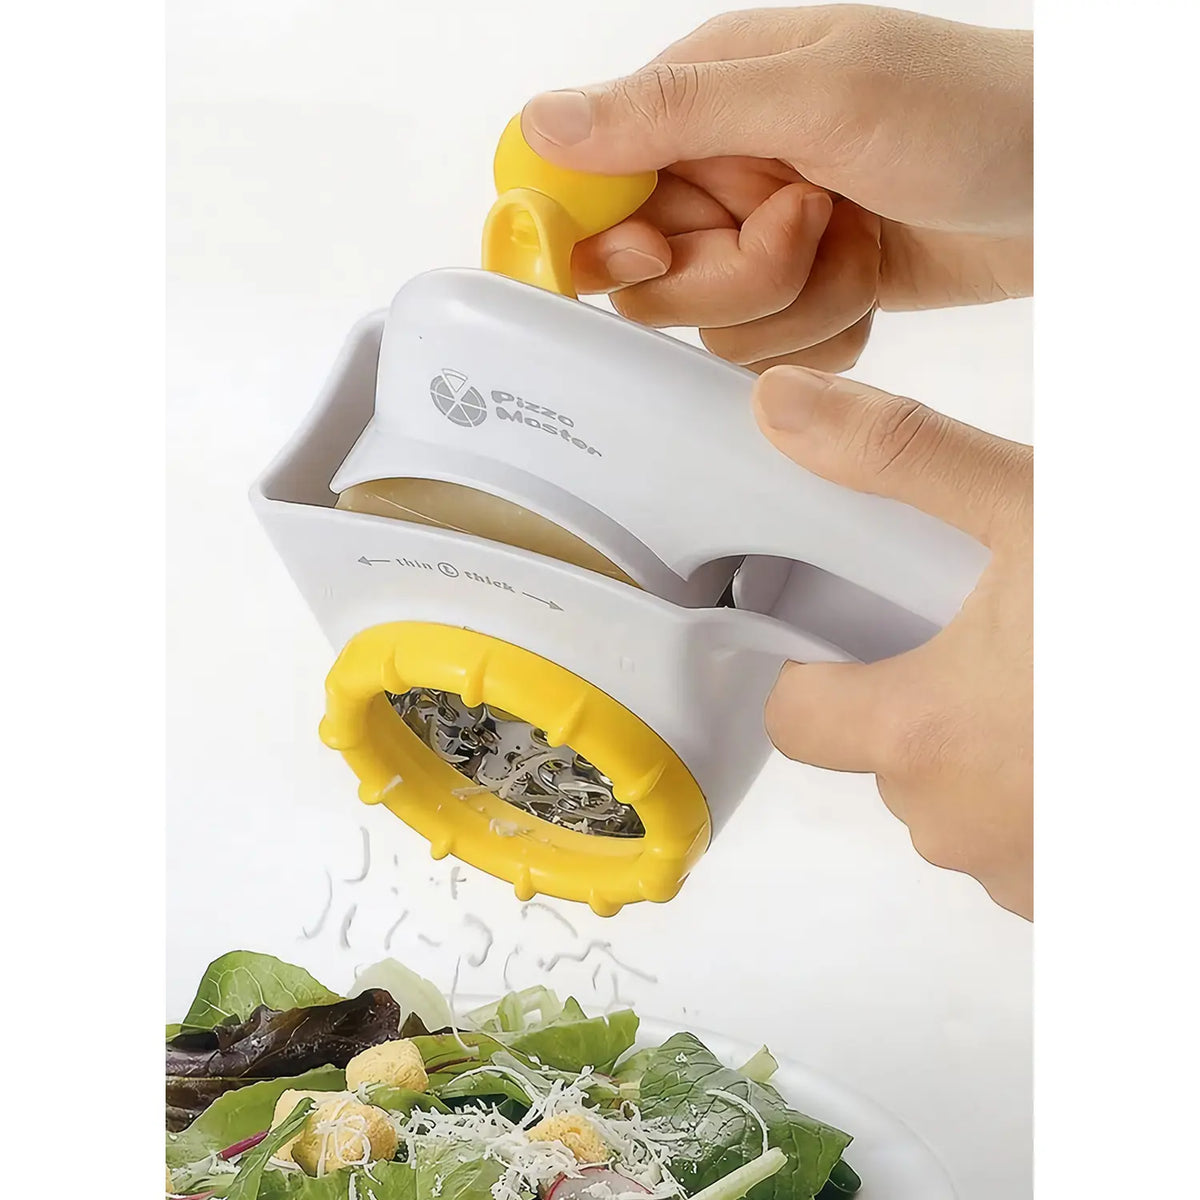 GS Home Products Stainless Steel Rotary Cheese Grater